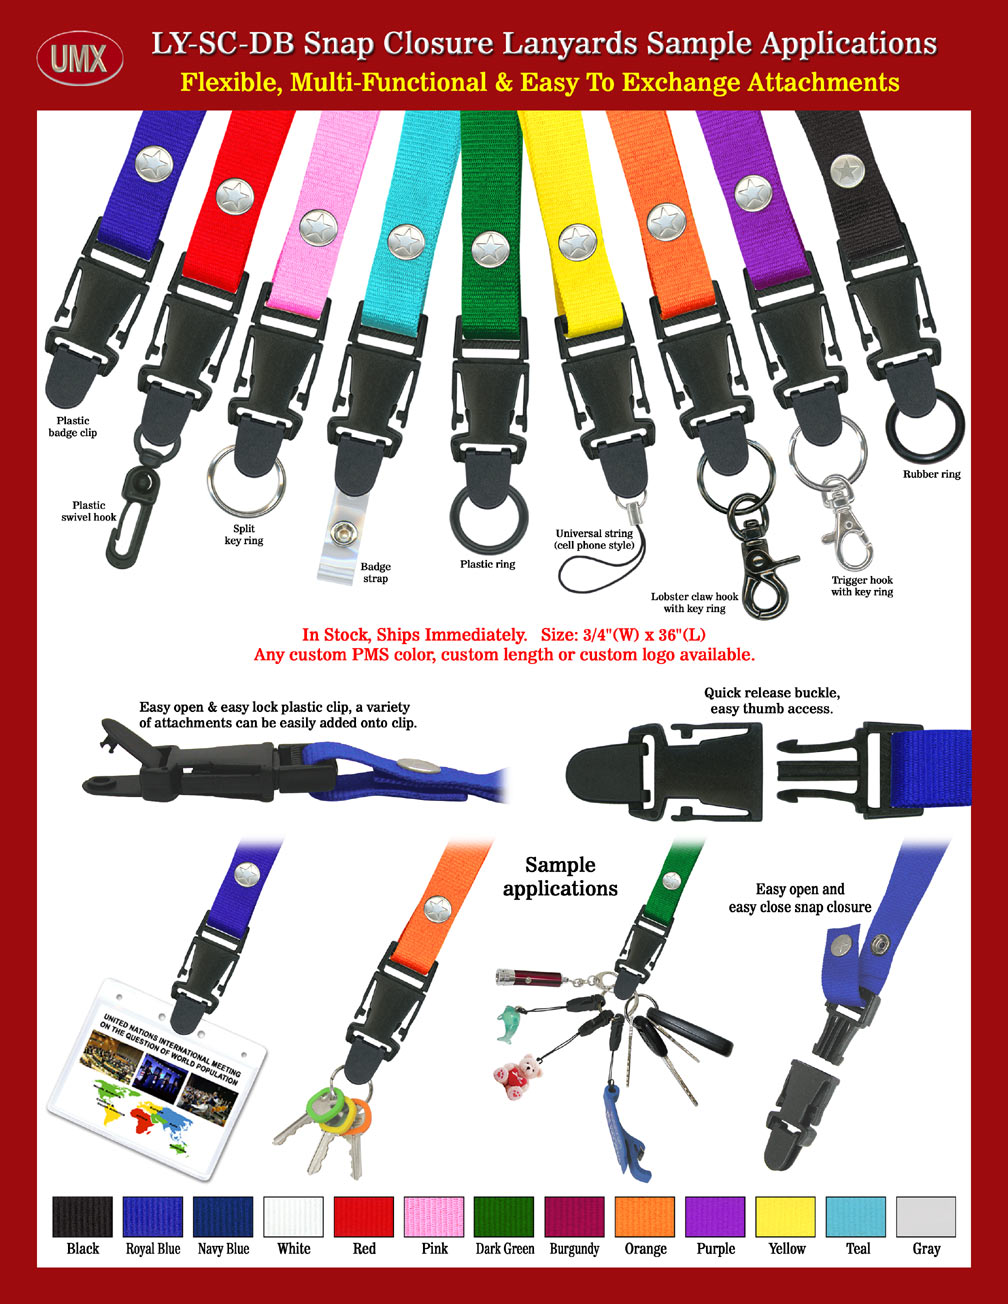 Snap-On Quick Release Neck Lanyard Application Samples With Photos.